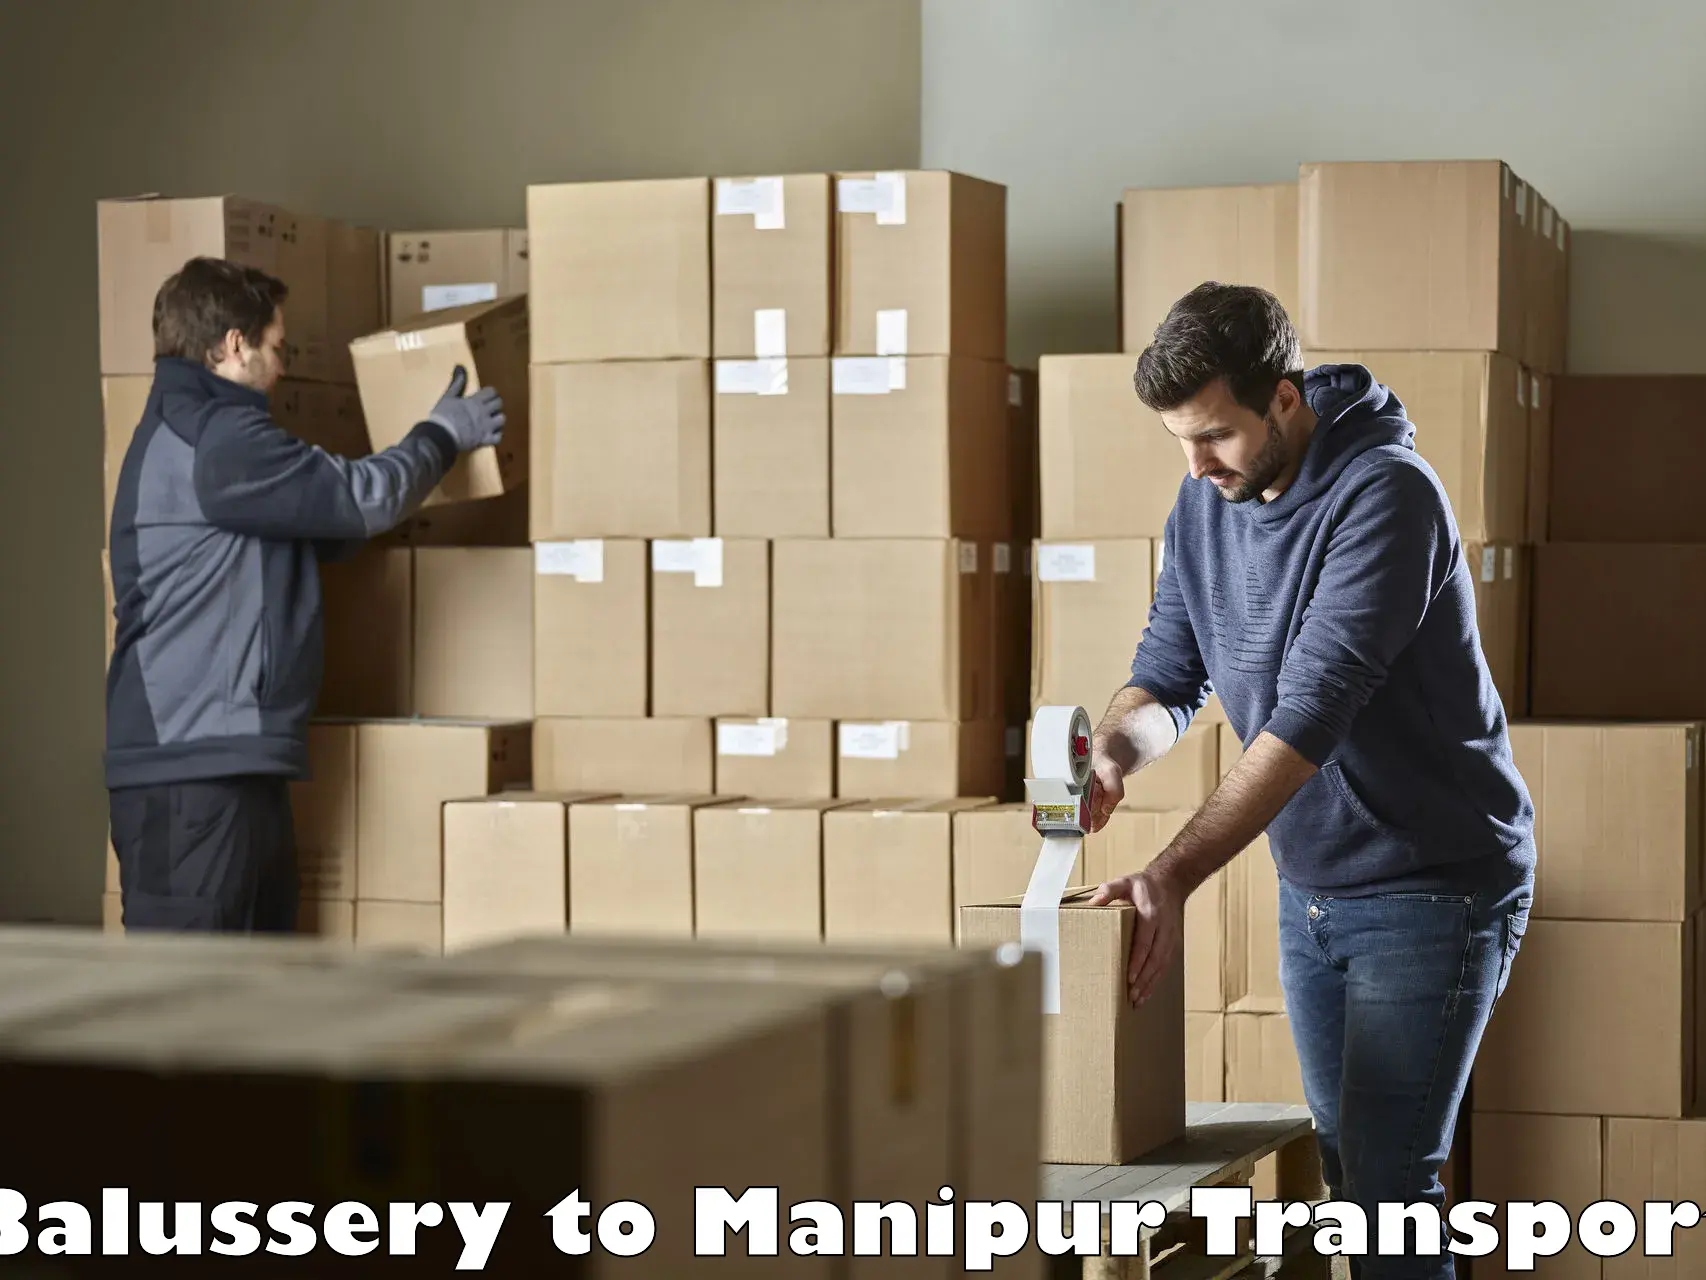 Daily transport service Balussery to Manipur